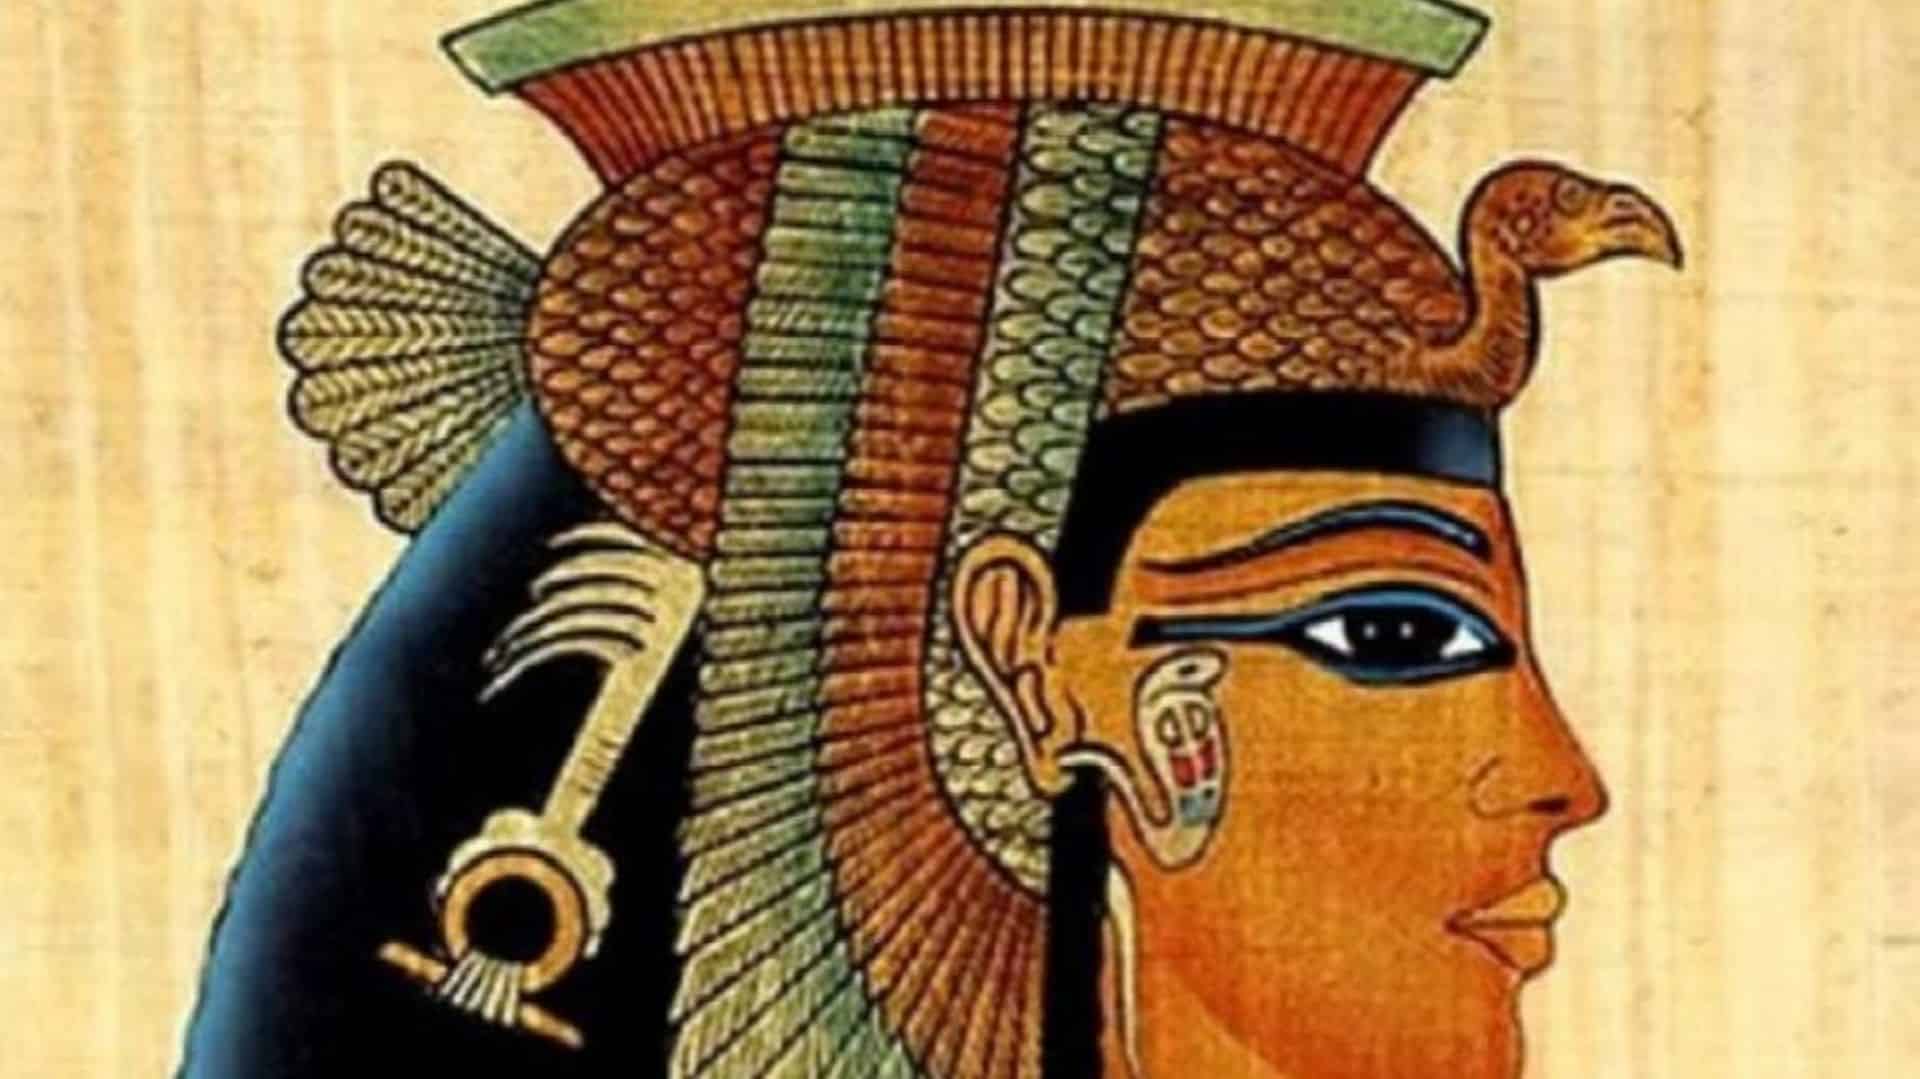 Science has deciphered the smell of Cleopatra’s perfume